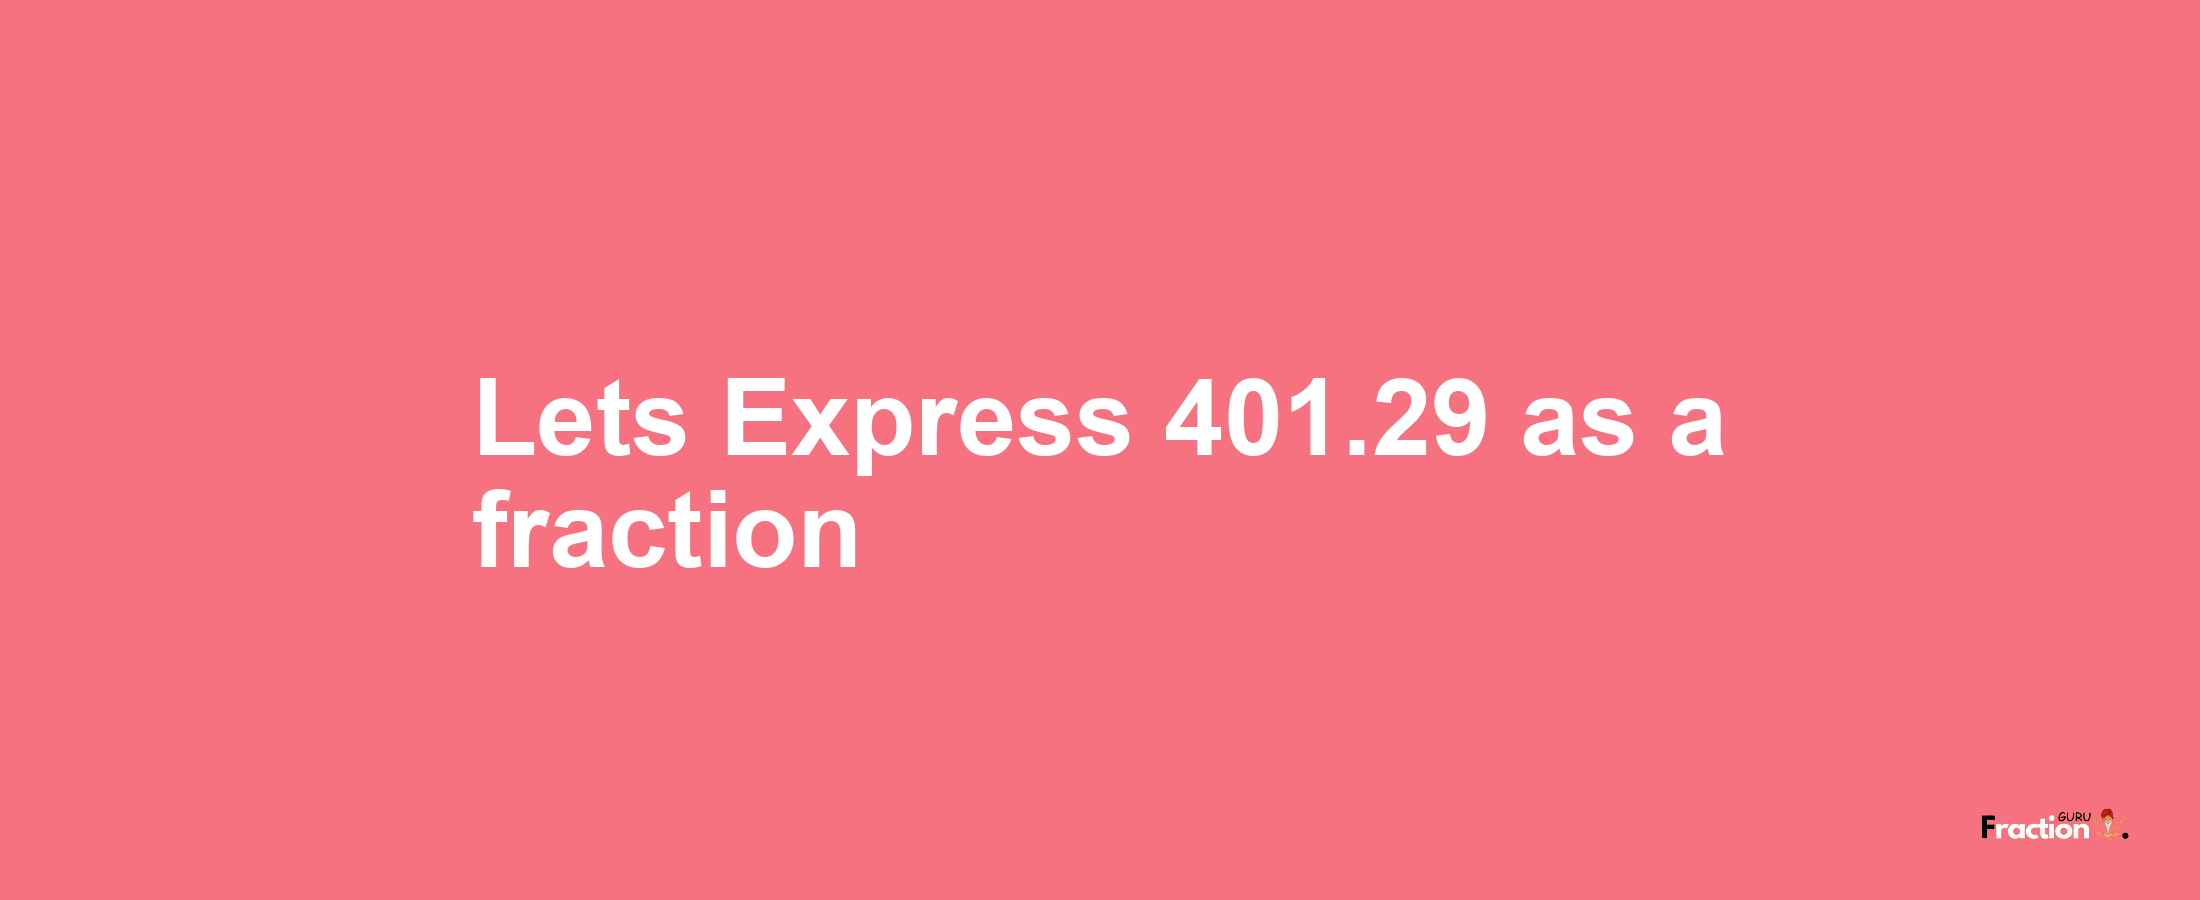 Lets Express 401.29 as afraction